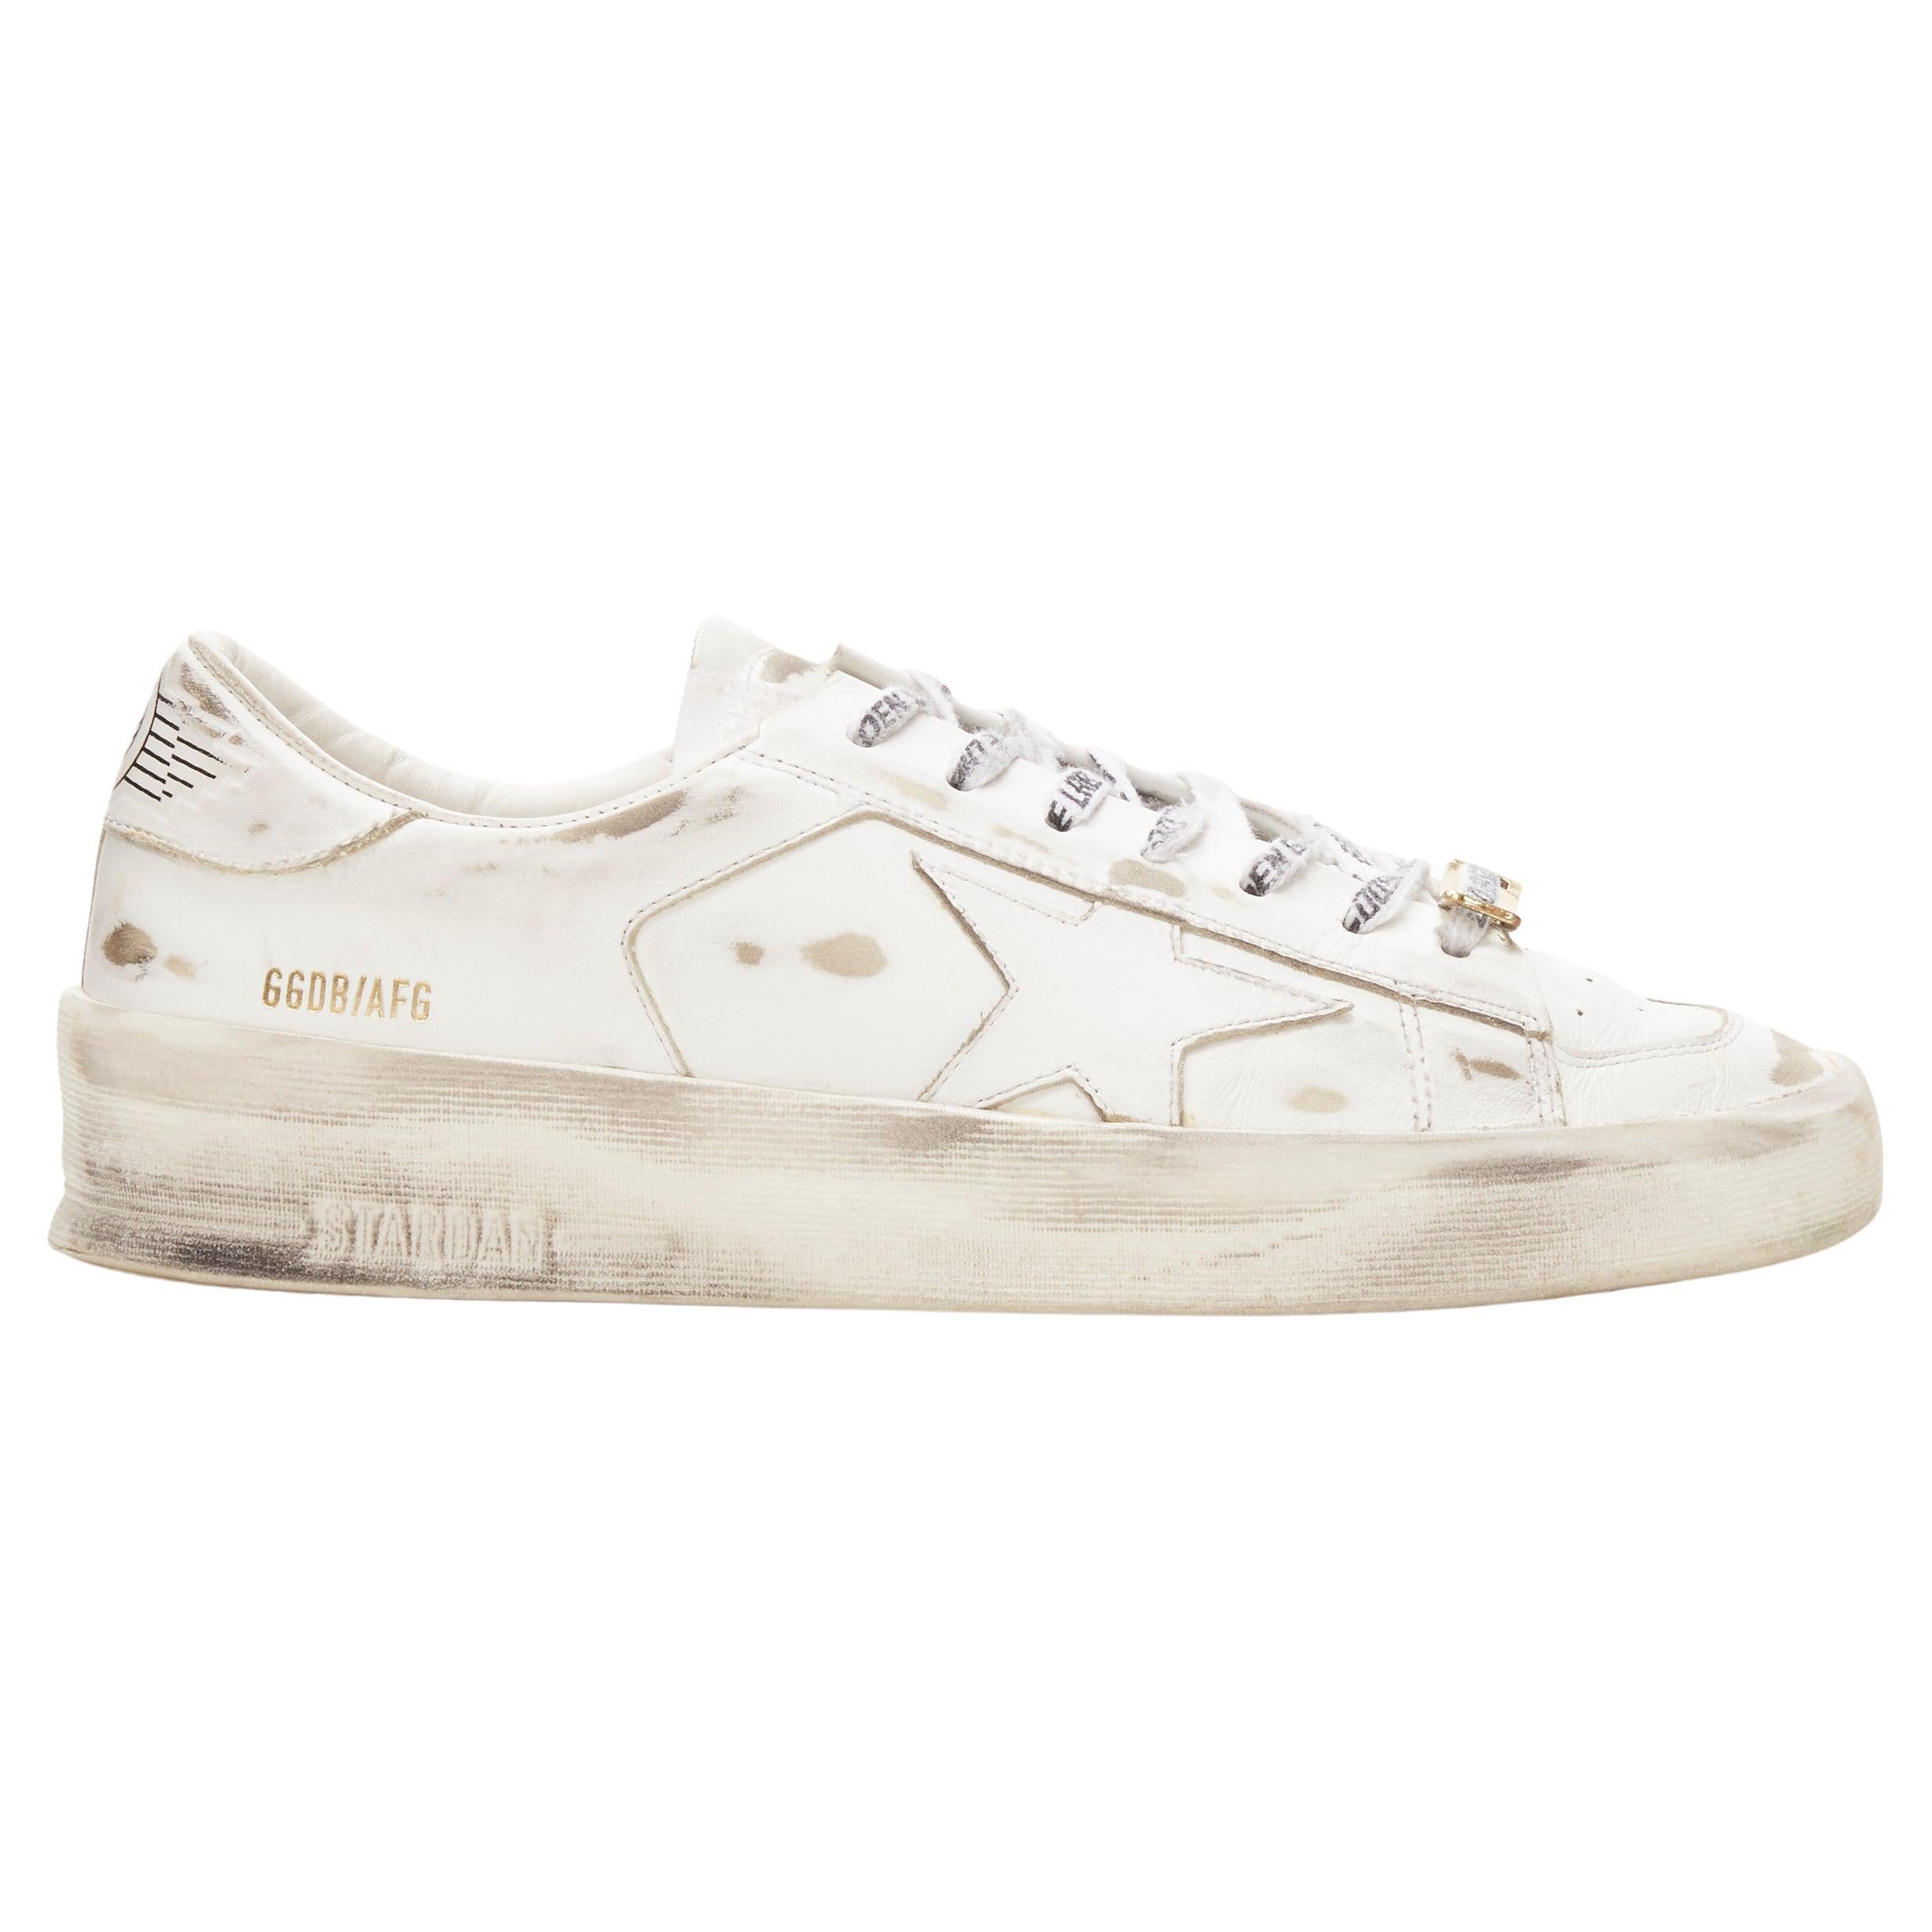 GOLDEN GOOSE GG/AFG Stardan distressed white low top sneaker EU38 For Sale